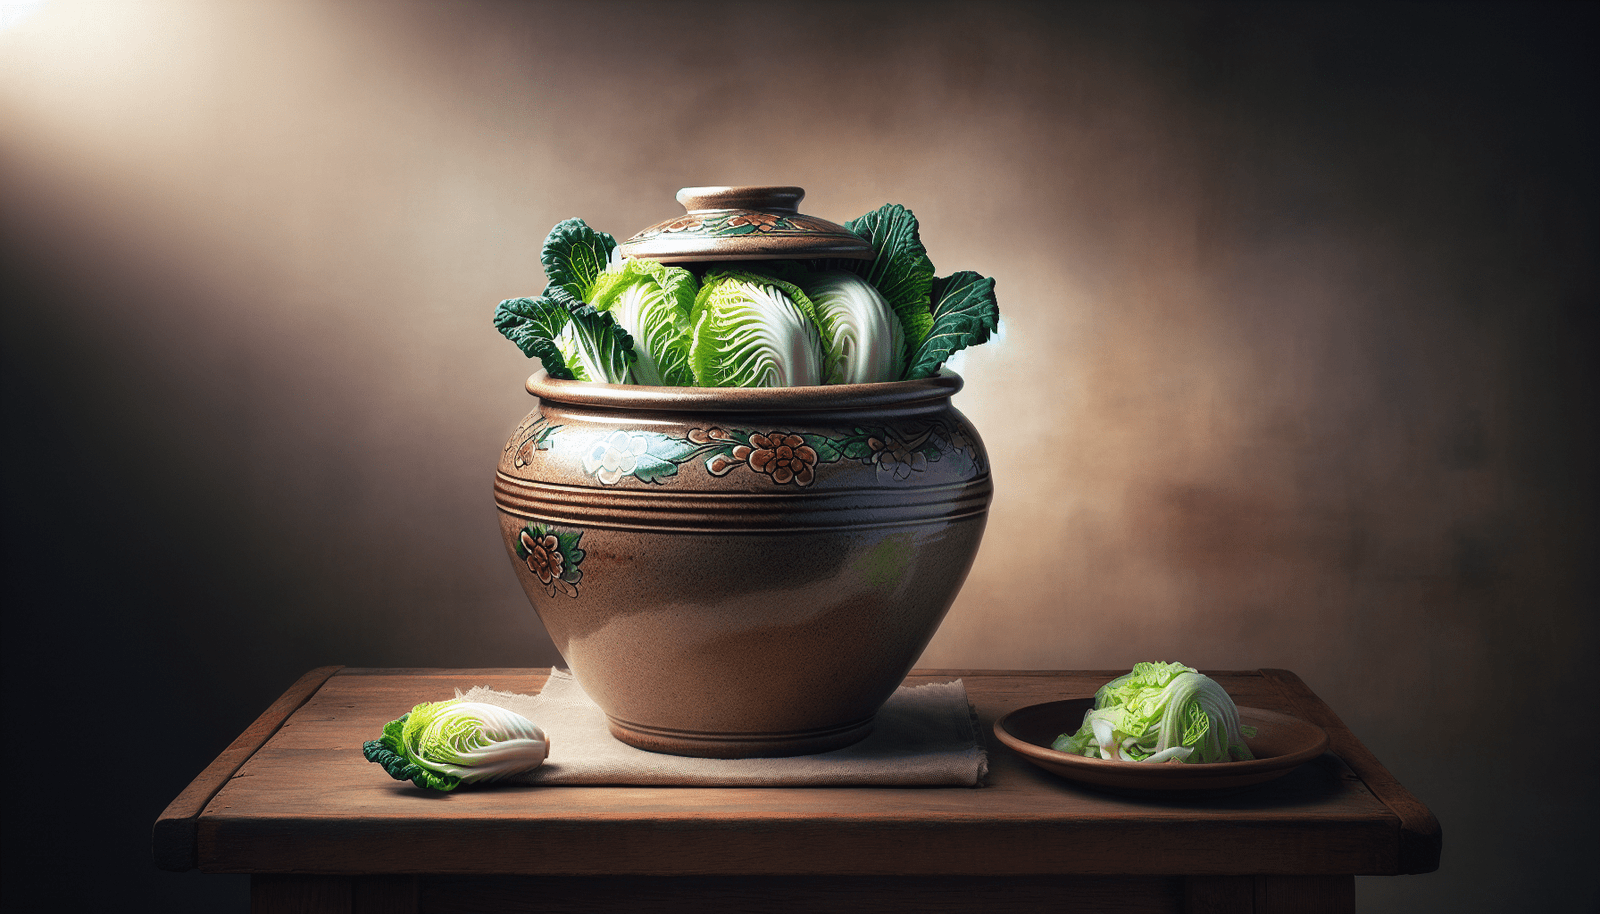 Can You Explain The Importance Of Fermentation In Traditional Korean Cuisine?